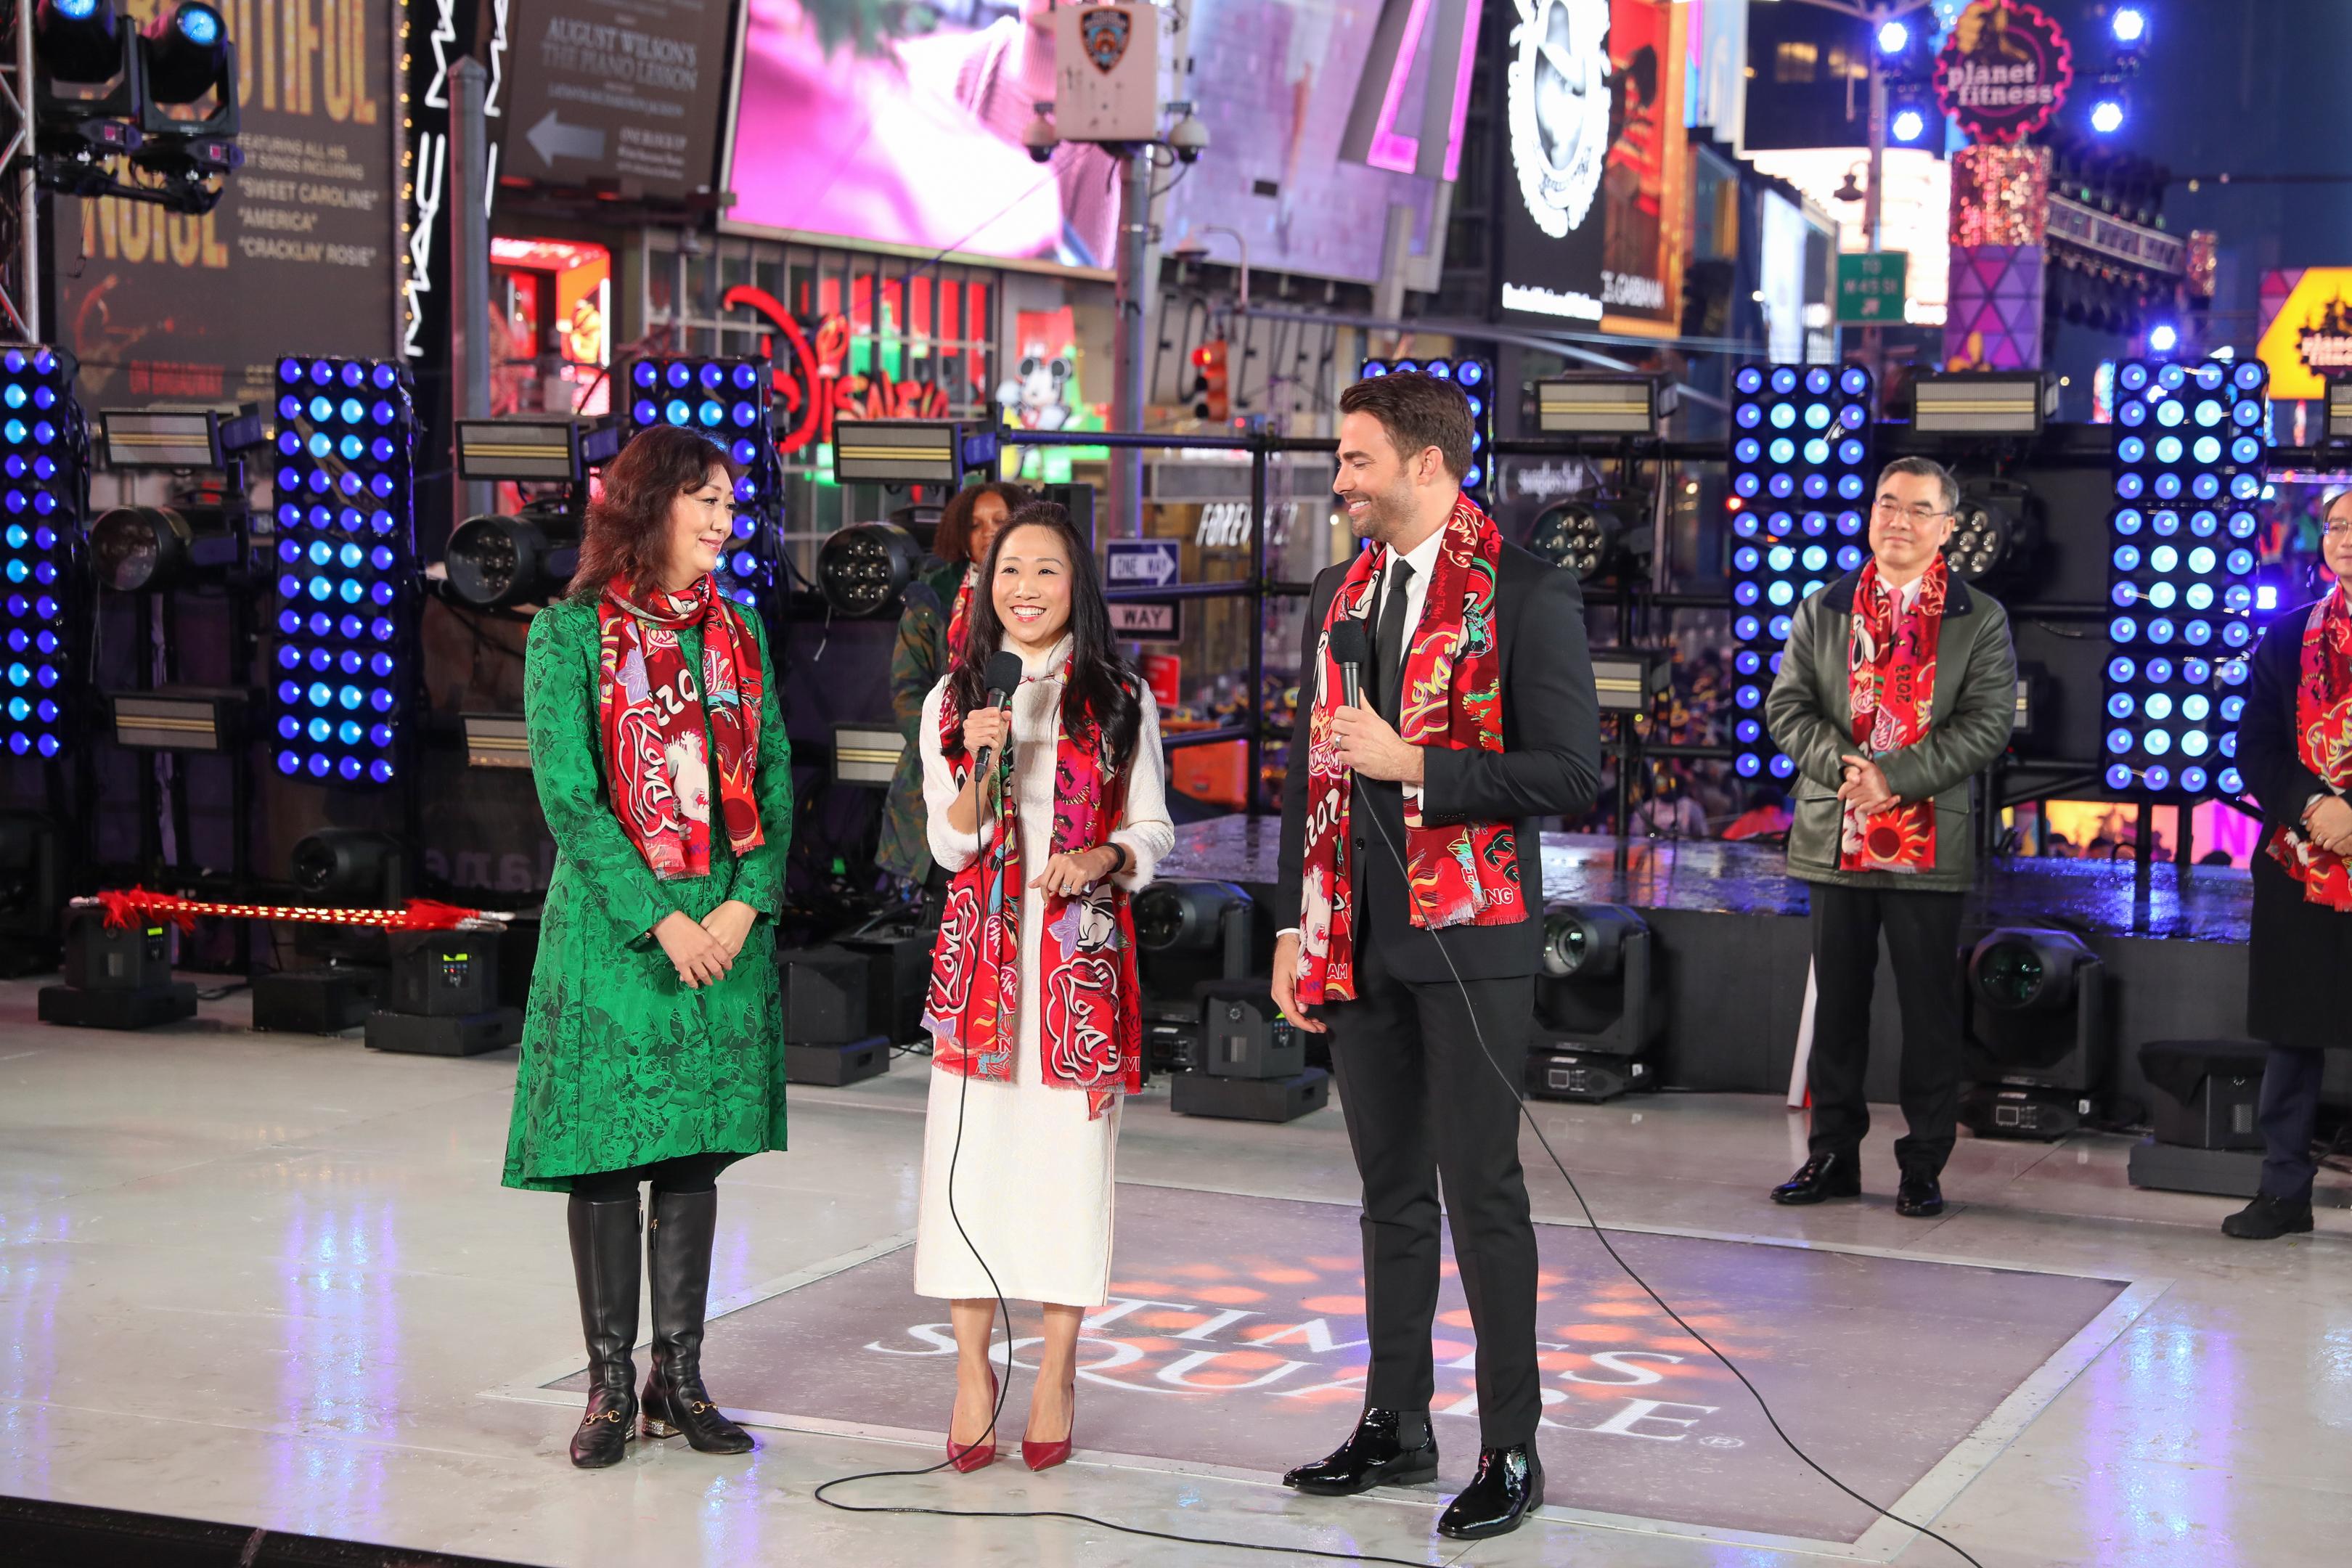 Hong Kong Rocks!" New Year's Eve Celebration New York Square (with photos)